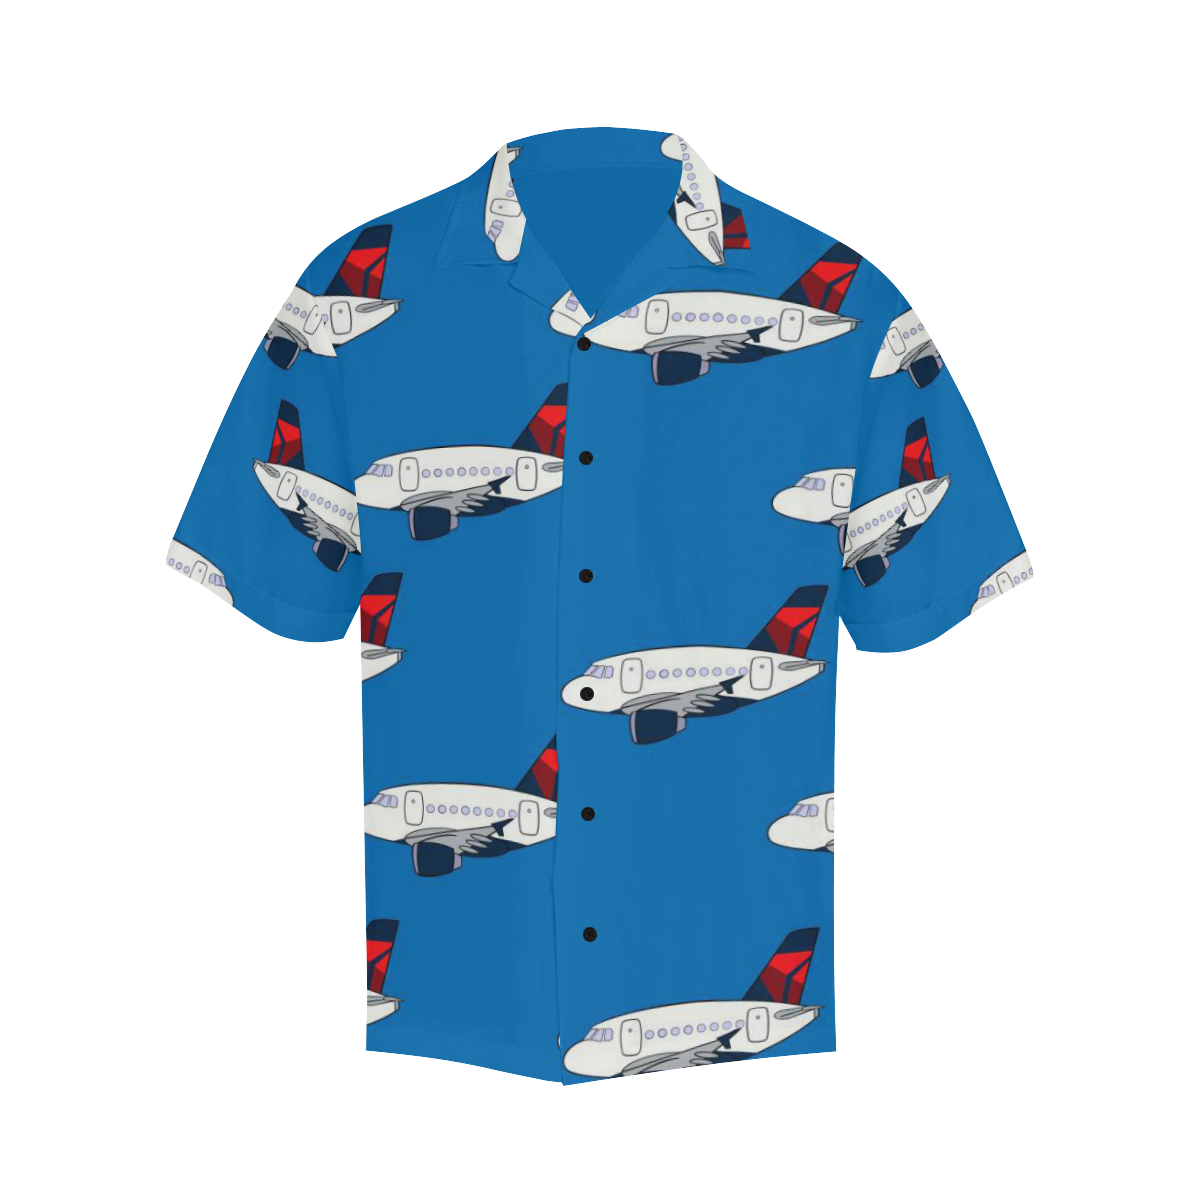 This is an image of a blue colour Hawaiian shirt. It has multiple prints of a flying aeroplane on it